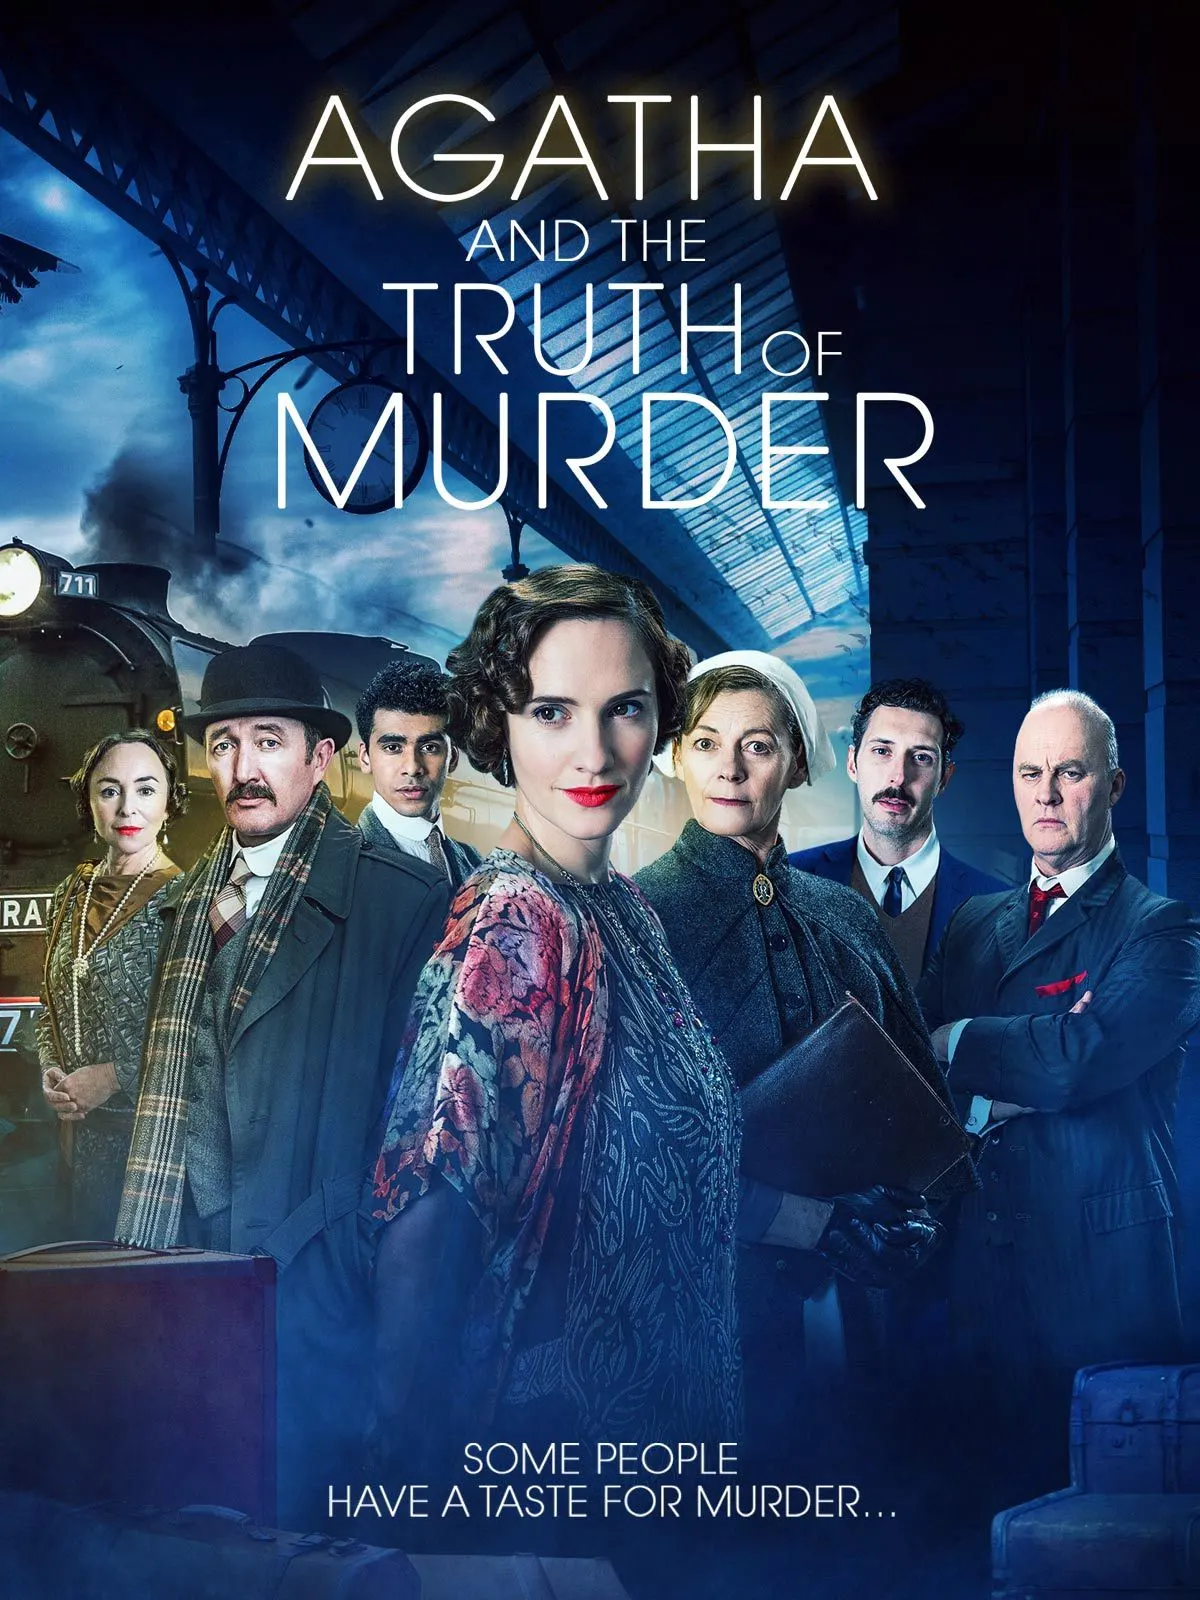 Agatha and the Truth of Murder Poster